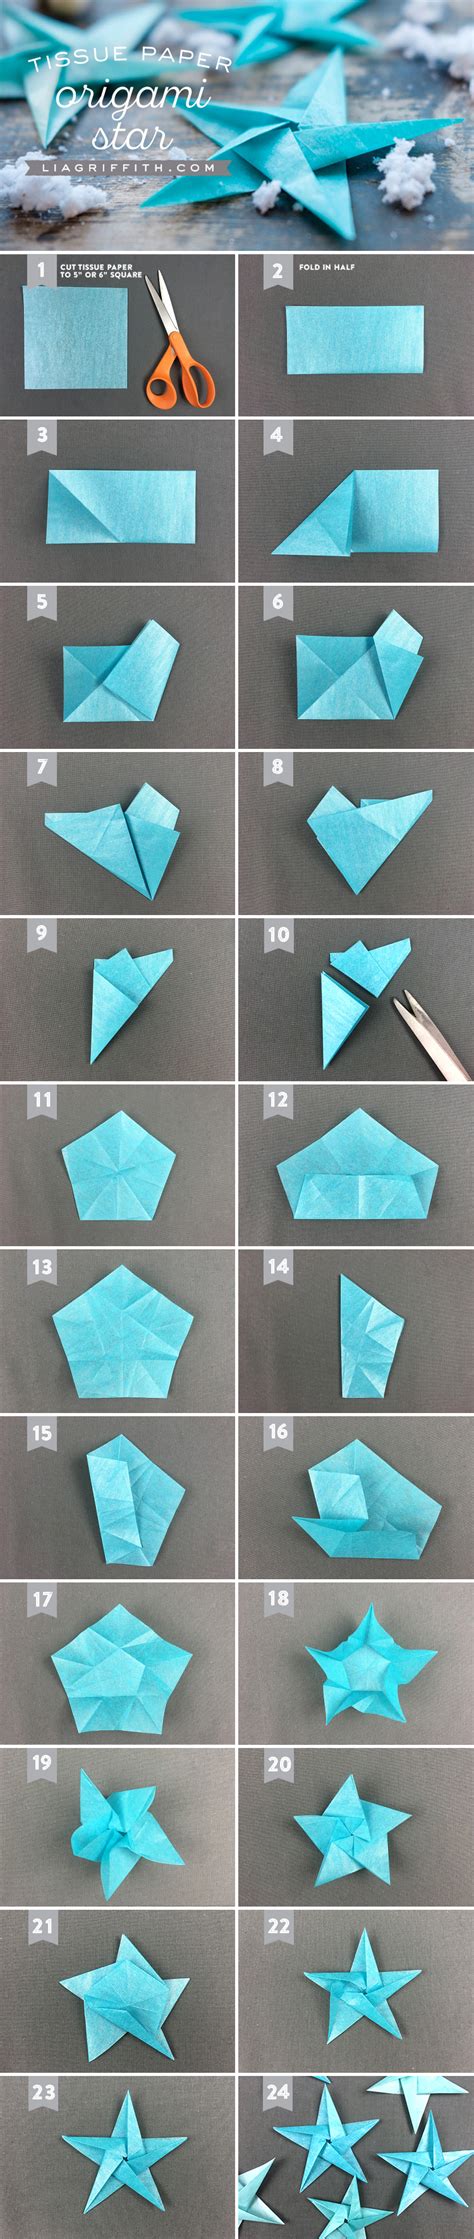 How do you make an origami christmas tree out of money? Tissue Star Origami Christmas Ornaments - Lia Griffith